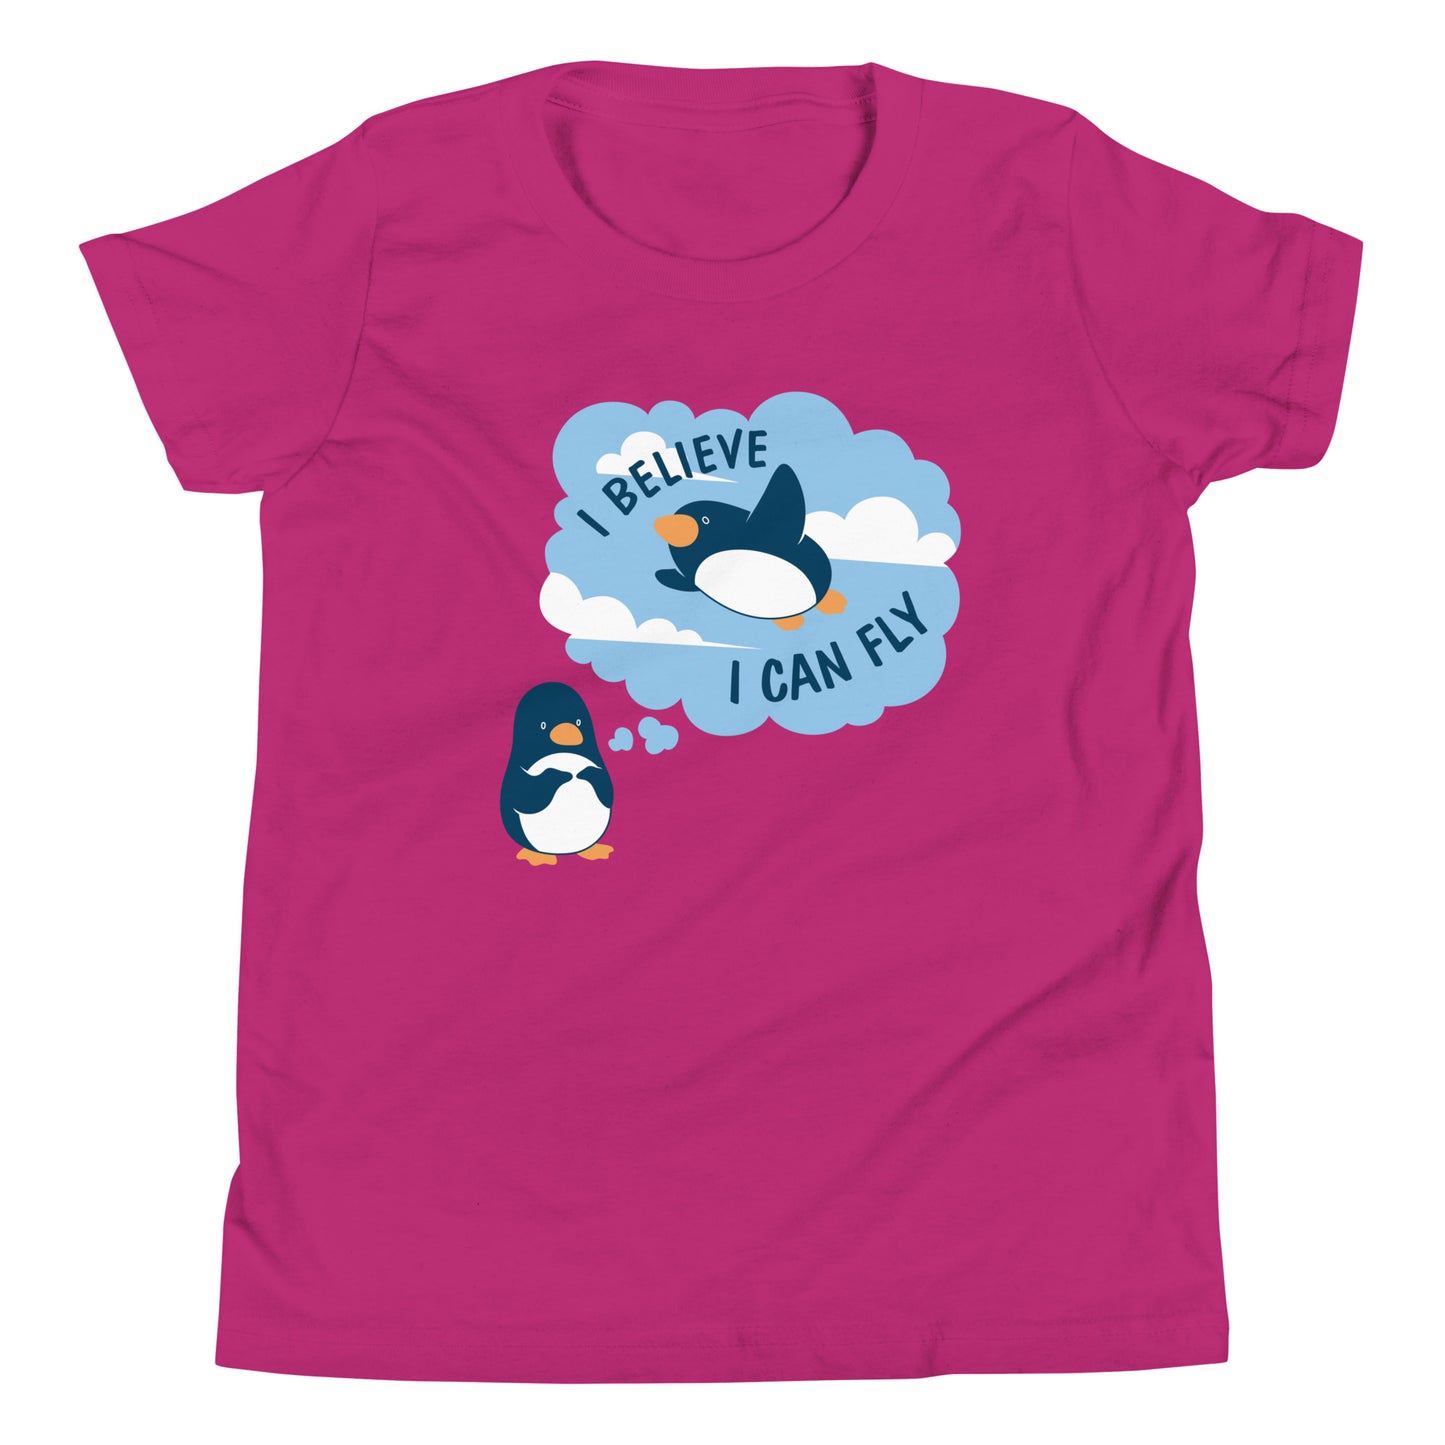 I Believe I Can Fly Kid's Youth Tee